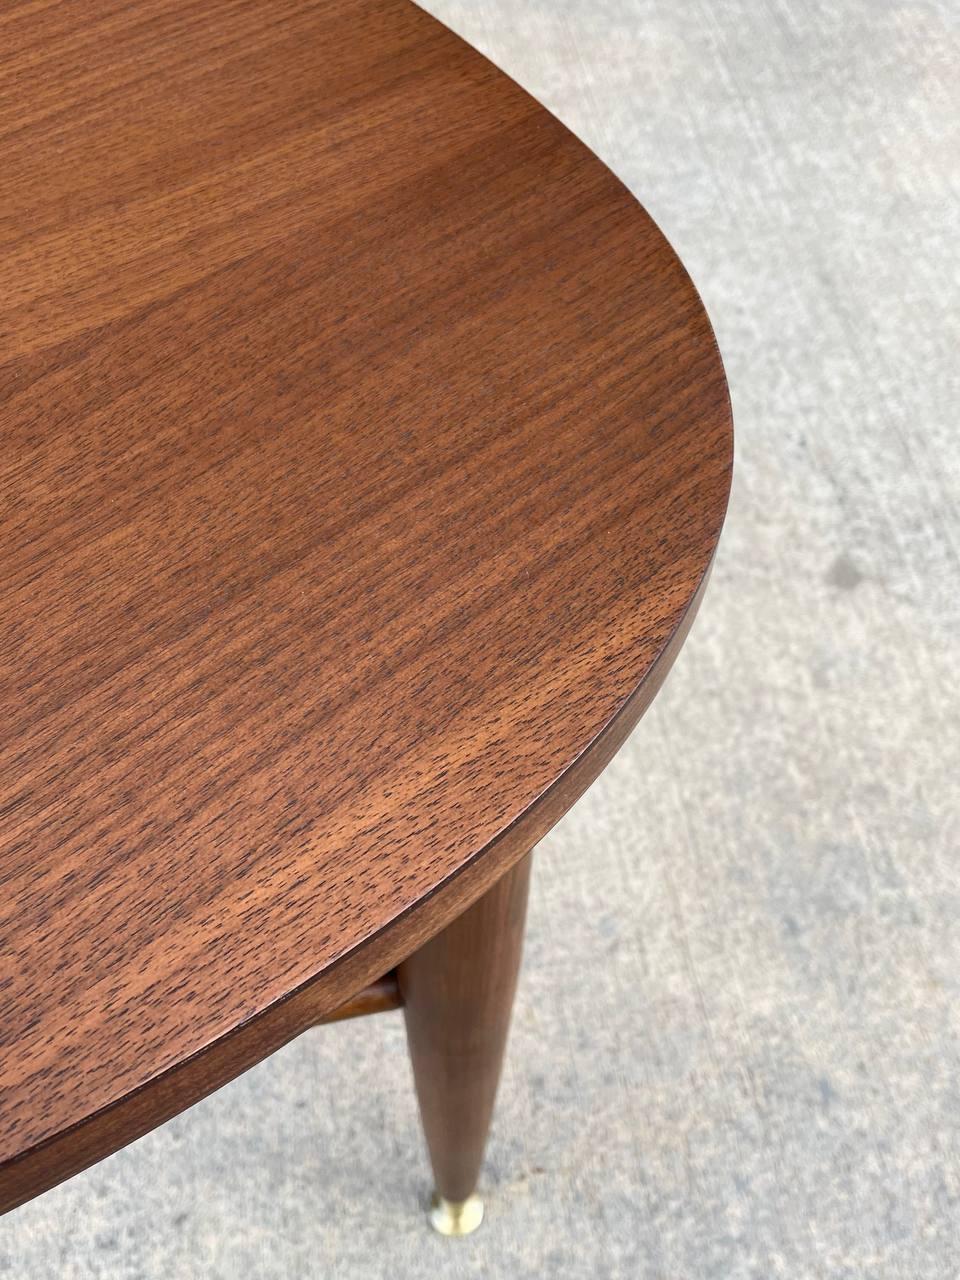 American Newly Refinished - Mid-Century Modern Walnut Guitar Pick Style Side Table For Sale